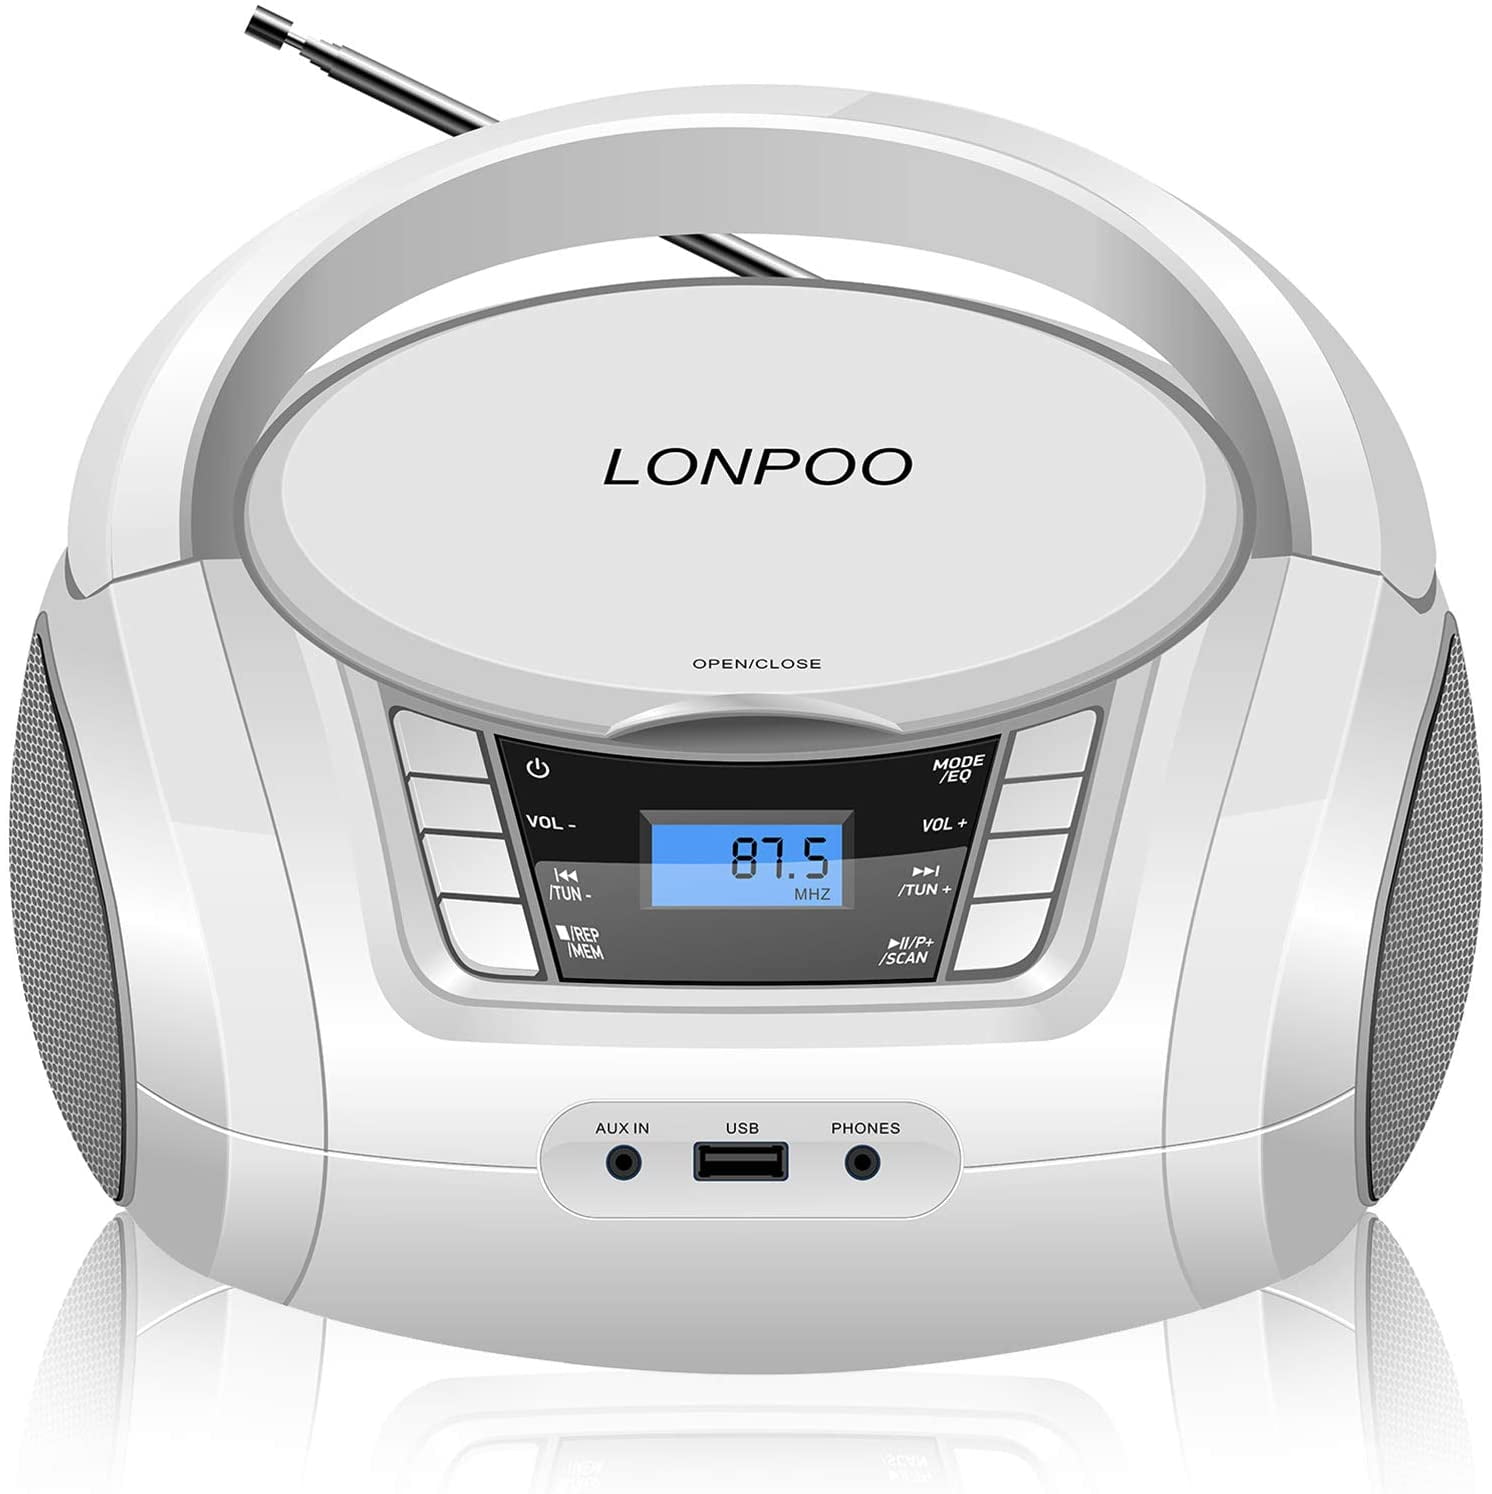 Versnipperd moord klassiek LP-D03 Portable Top-Loading CD MP3 Player (White), Boombox Bluetooth Stereo丨FM  Radio with Aux Line in, Headphone Jack and USB Port, Foldable Carrying  Handle - Walmart.com